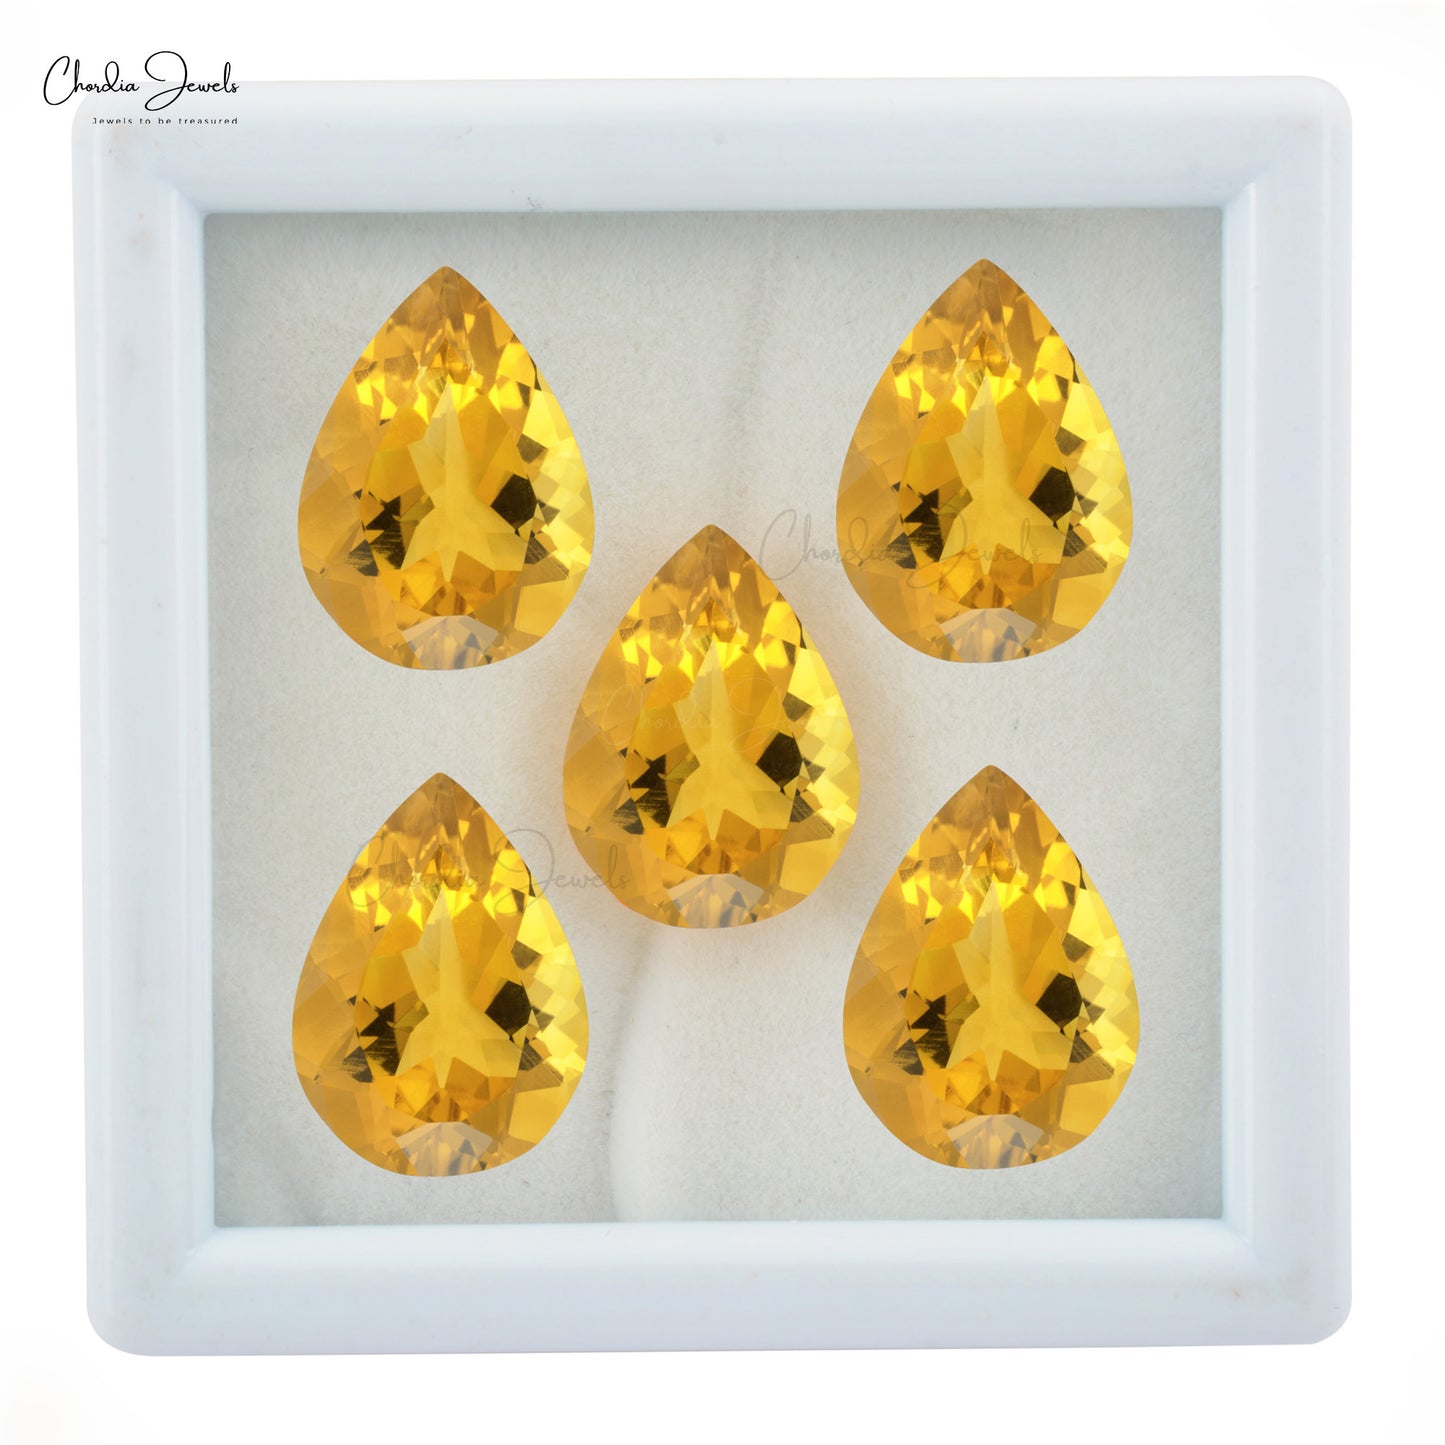 AAA Quality Natural Yellow Citrine 6x4 MM Faceted Pear Gemstone for Sale, 1 Piece